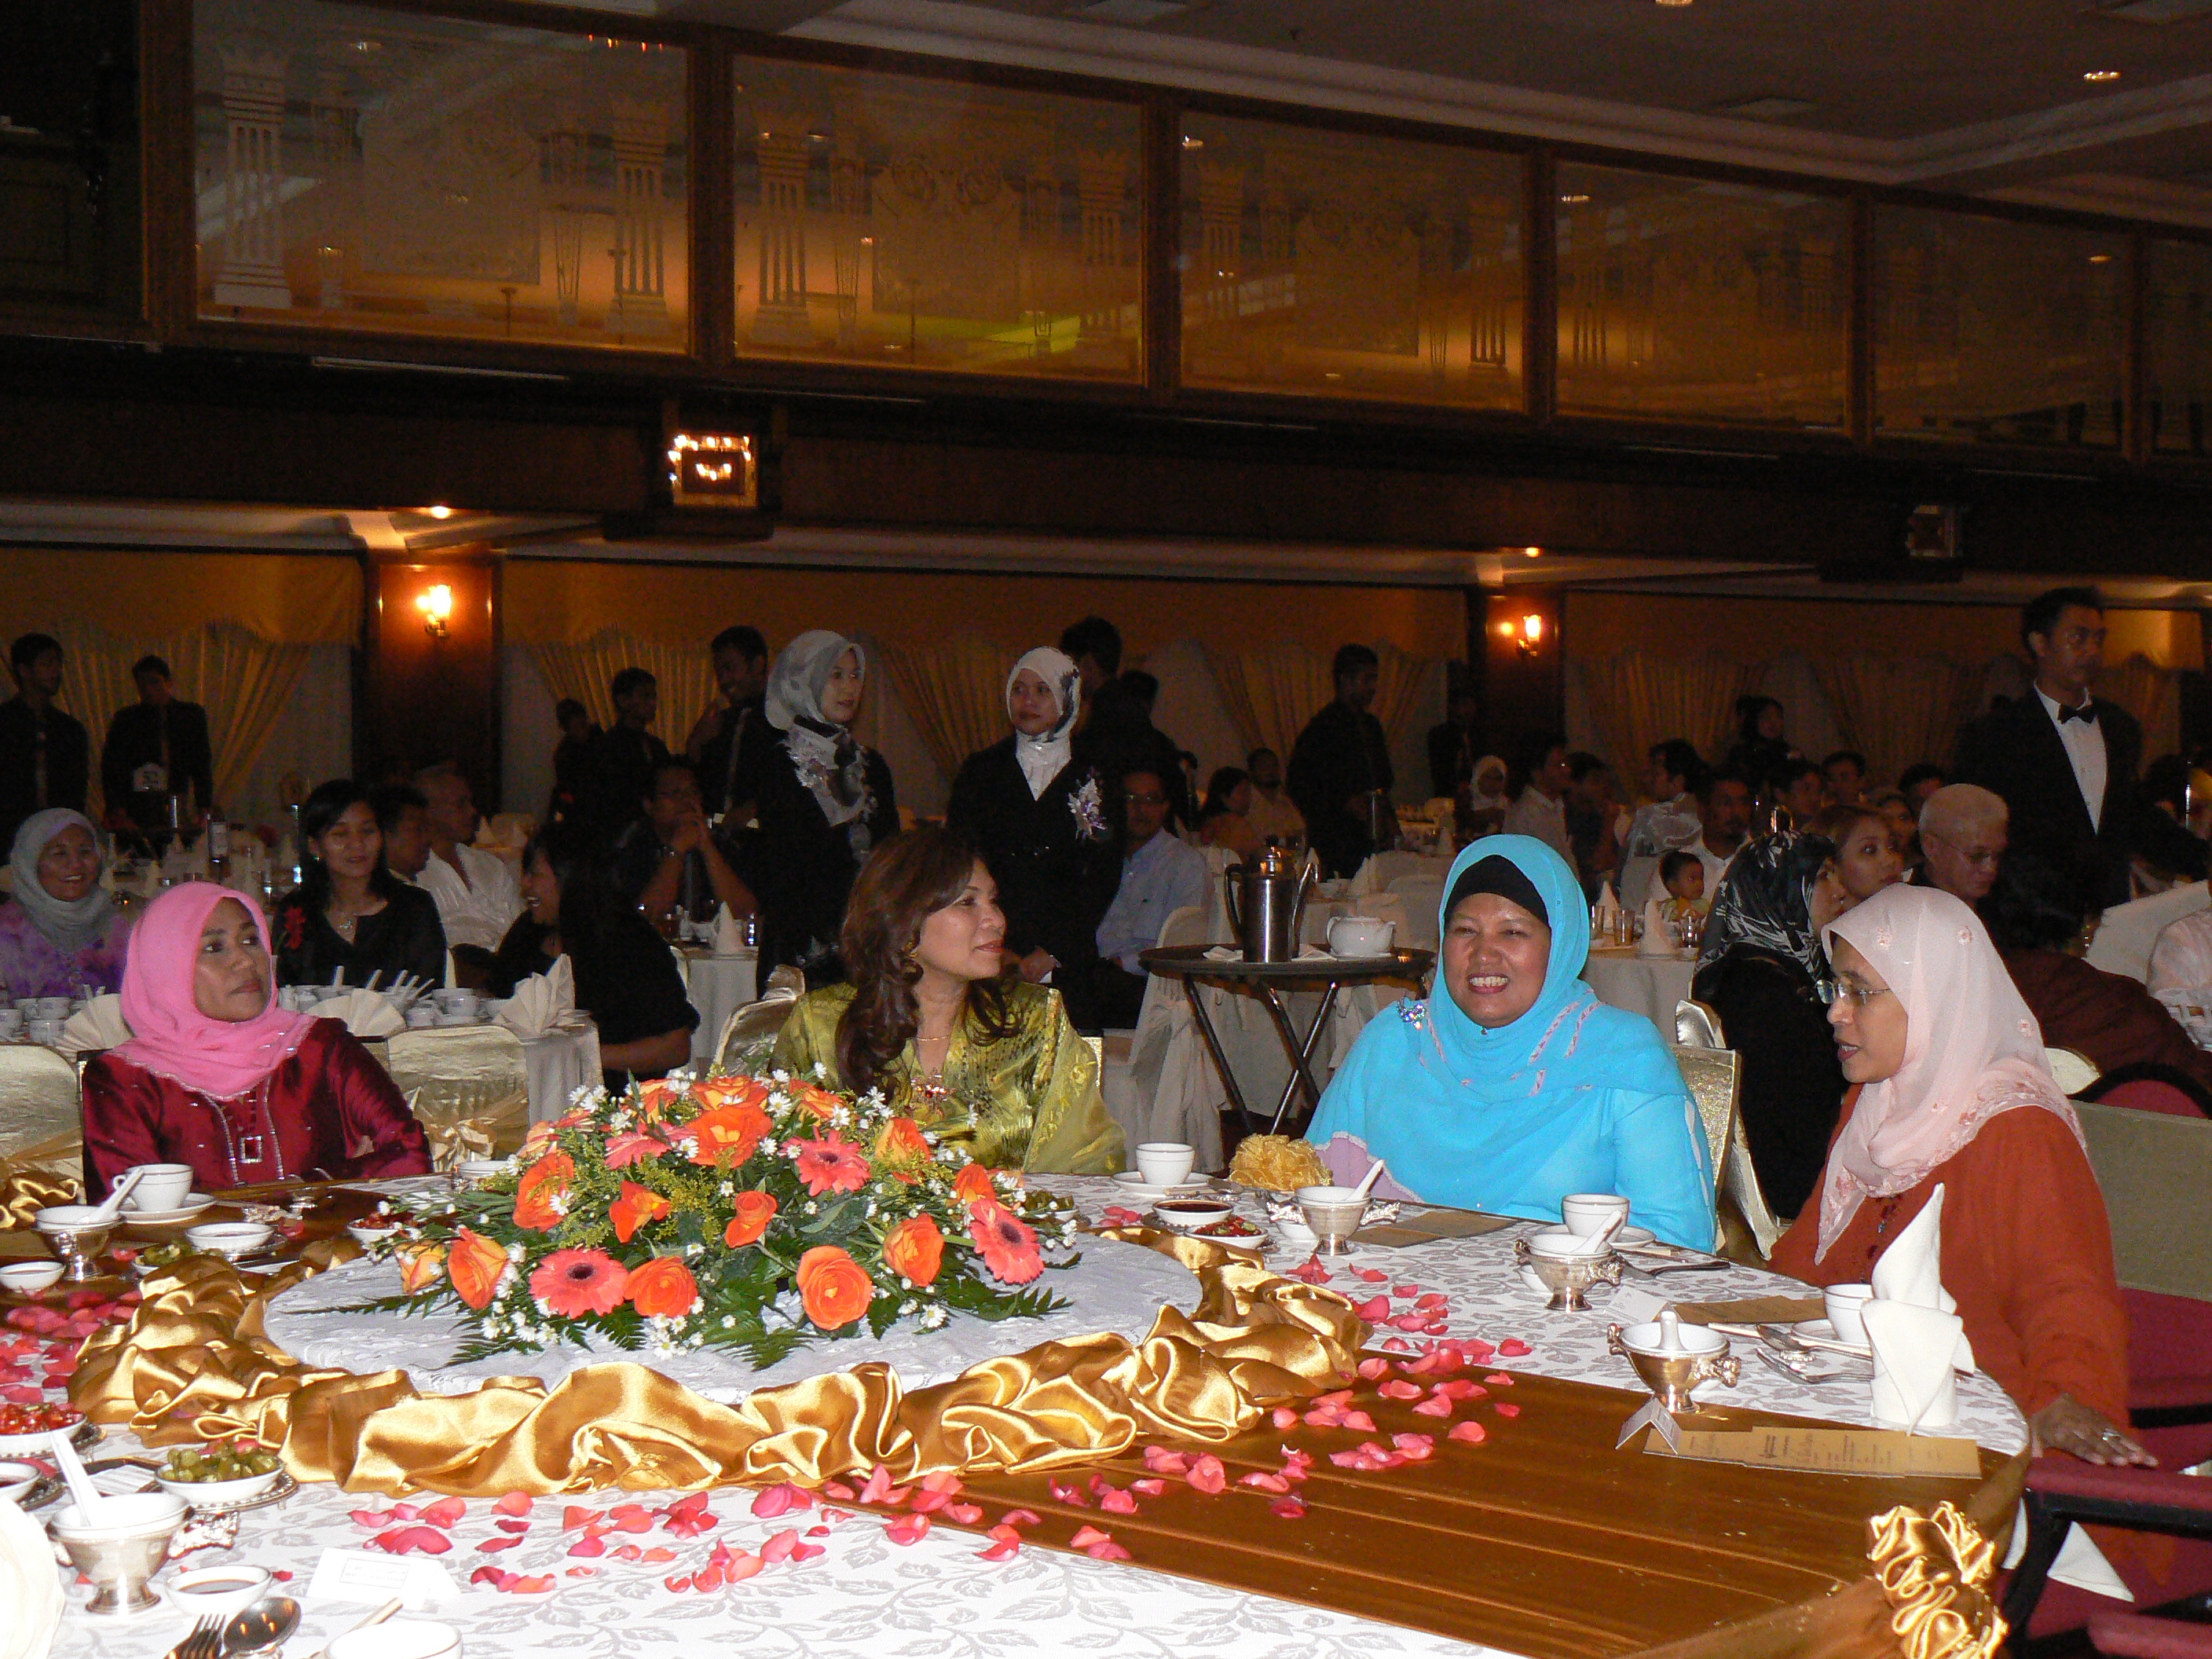 Dinner and Party, Celebration, Entertainment, Gathering, MiddleEast, HQ Photo